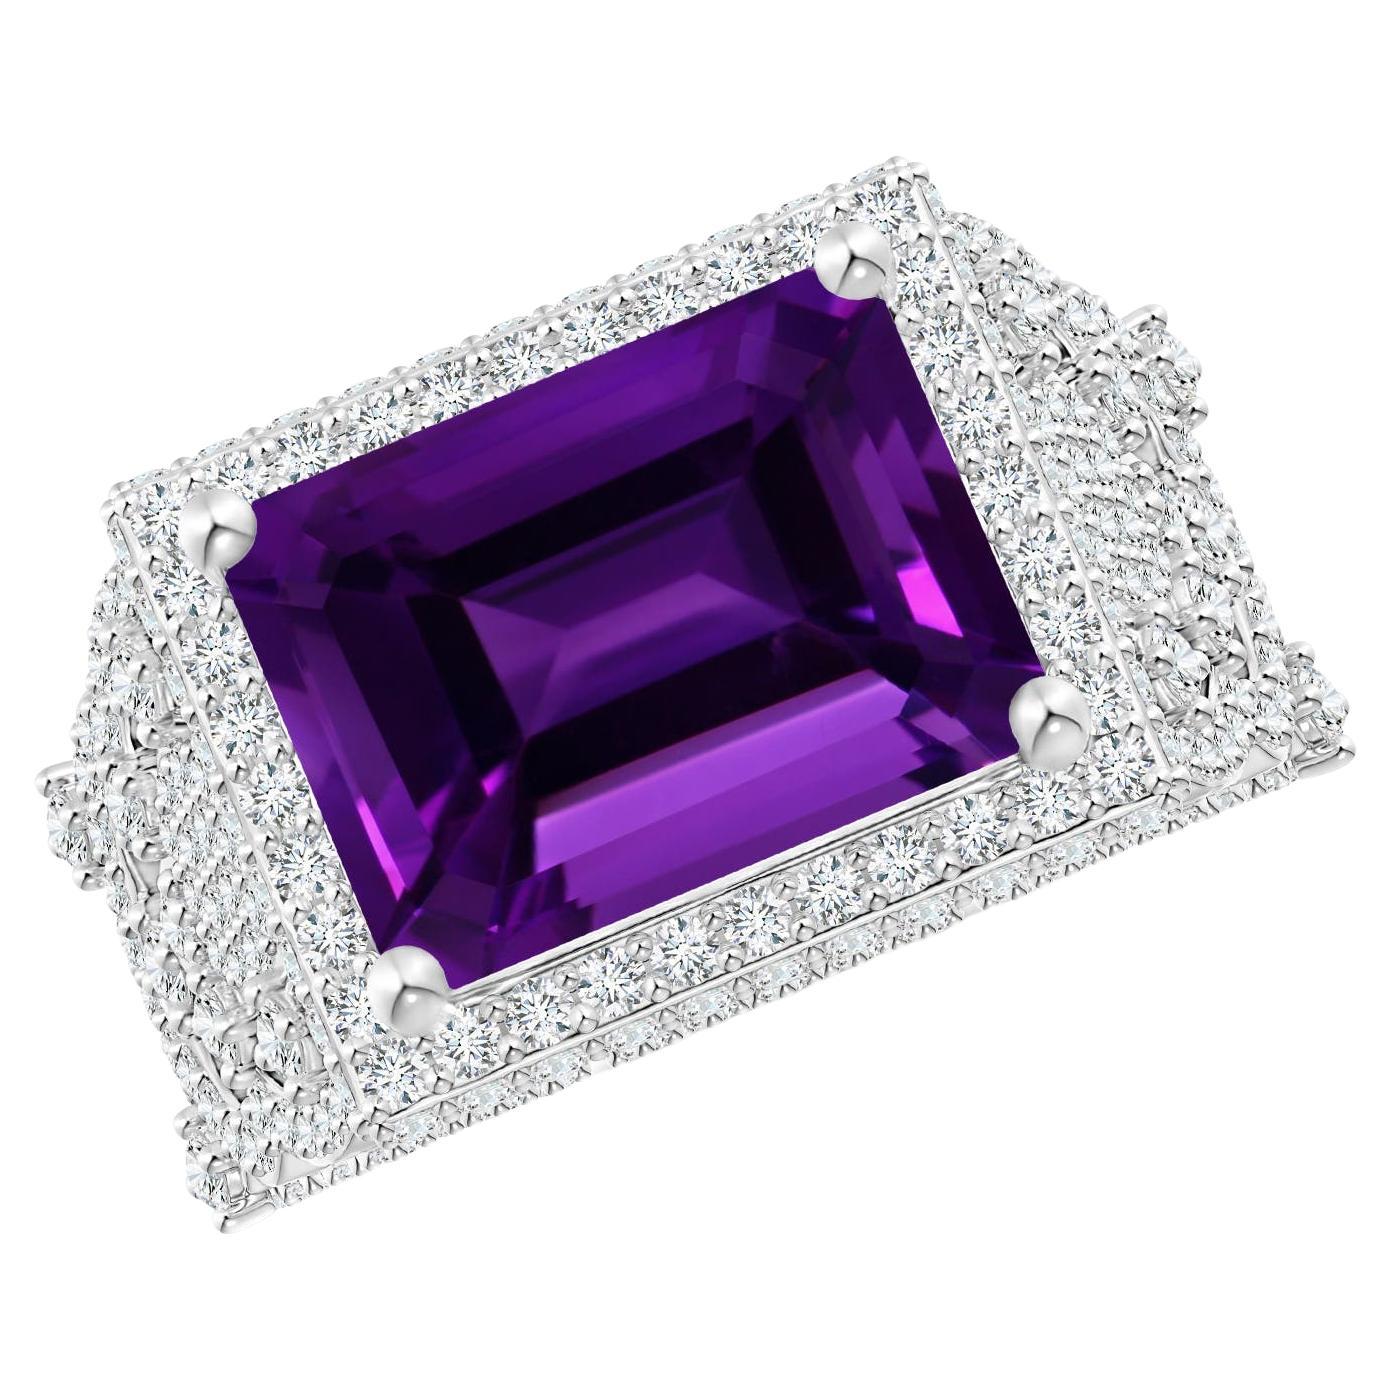 ANGARA GIA Certified Natural Amethyst Cocktail Ring in White Gold with Diamonds